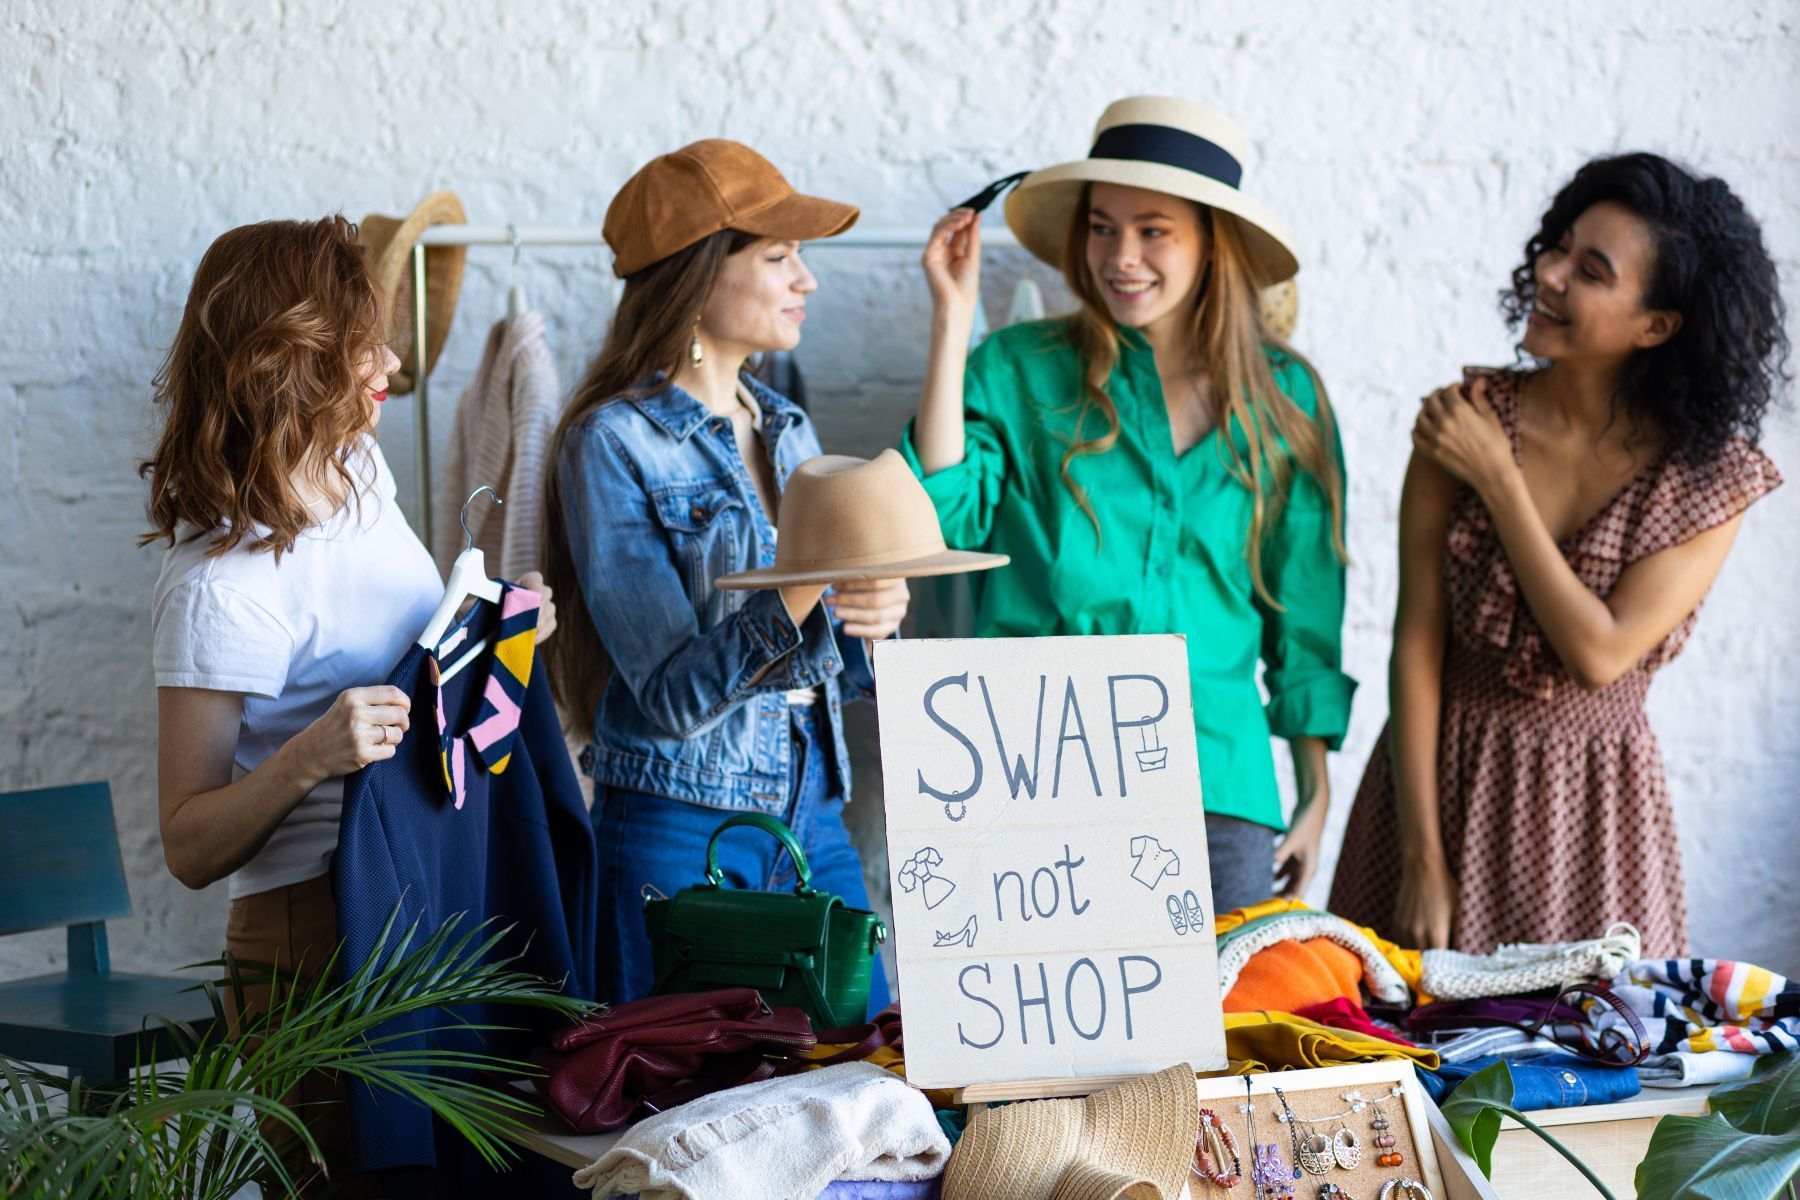 A group of women trying on clothes in front of a sign that says 'Swap don't shop'